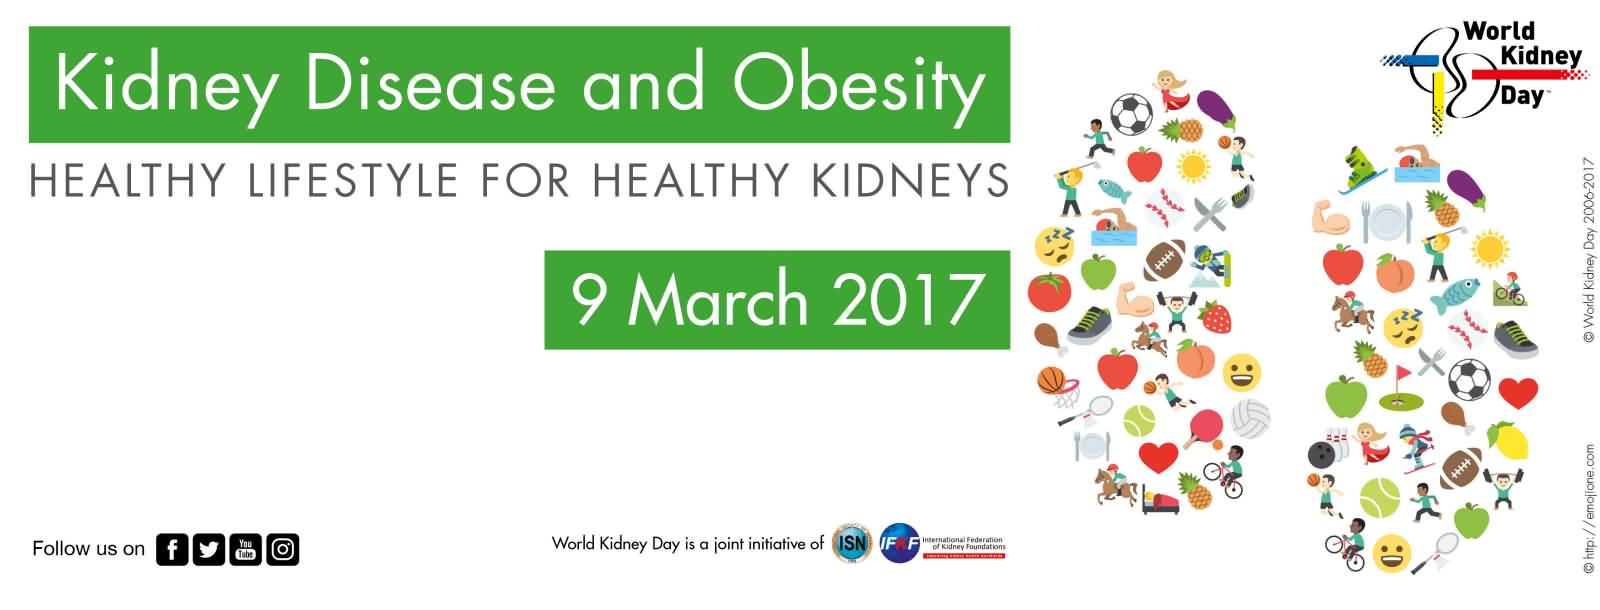 Kidney Disease And Obesity Healthy Lifestyle For Healthy Kidneys World Kidney Day 9 March 2017